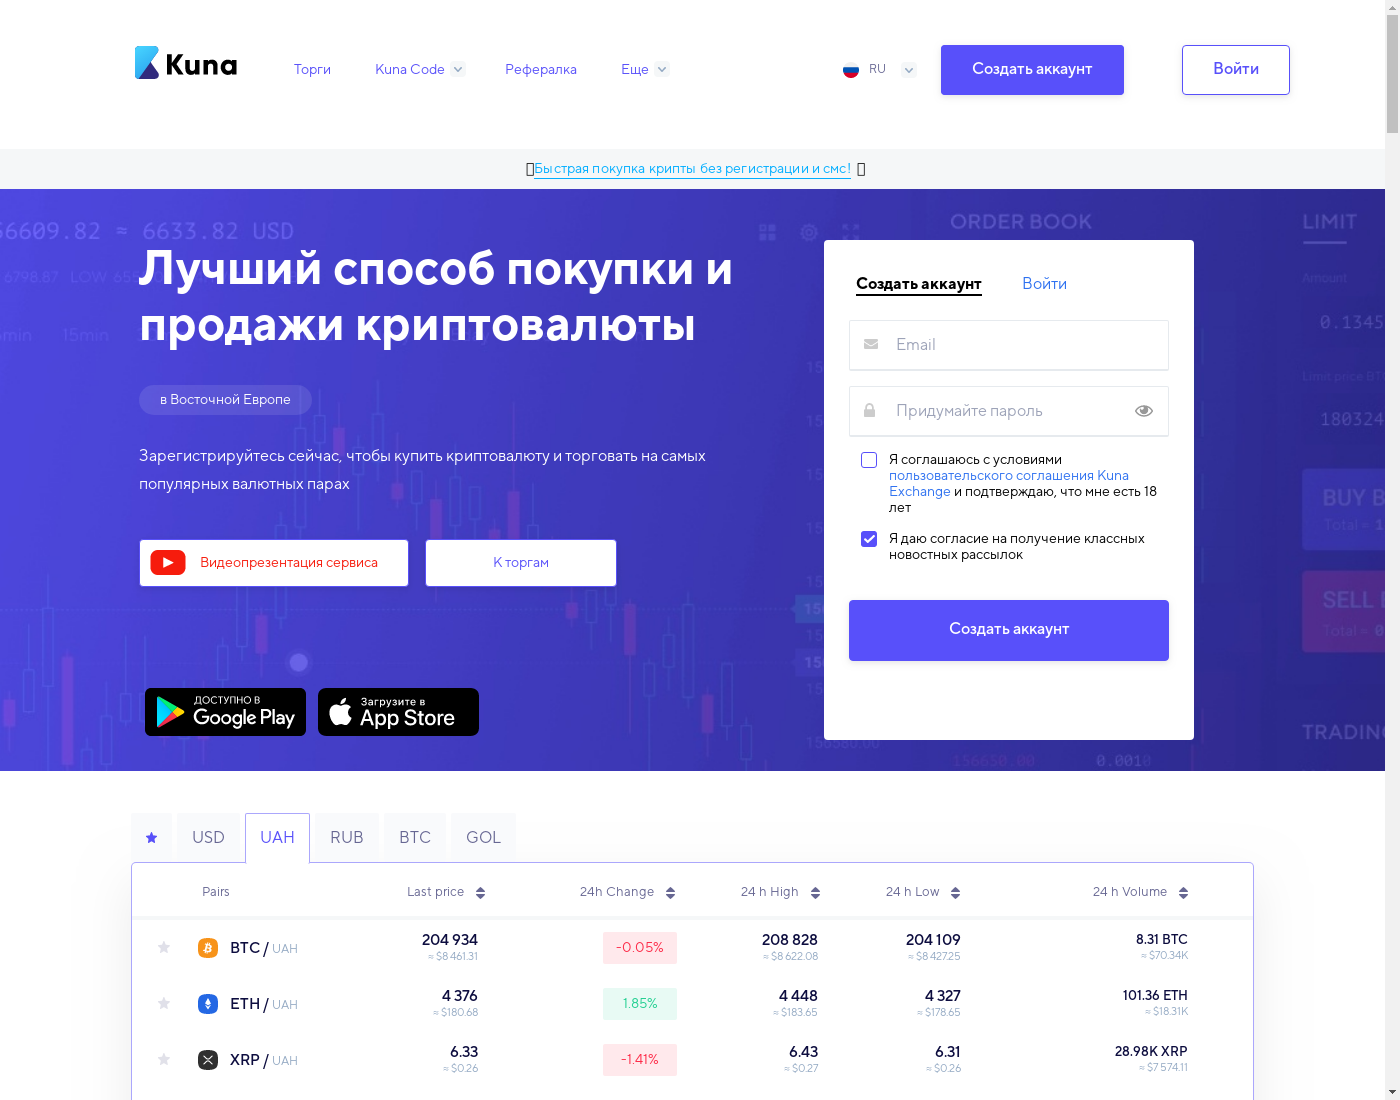 Kuna user interface: the home page in English